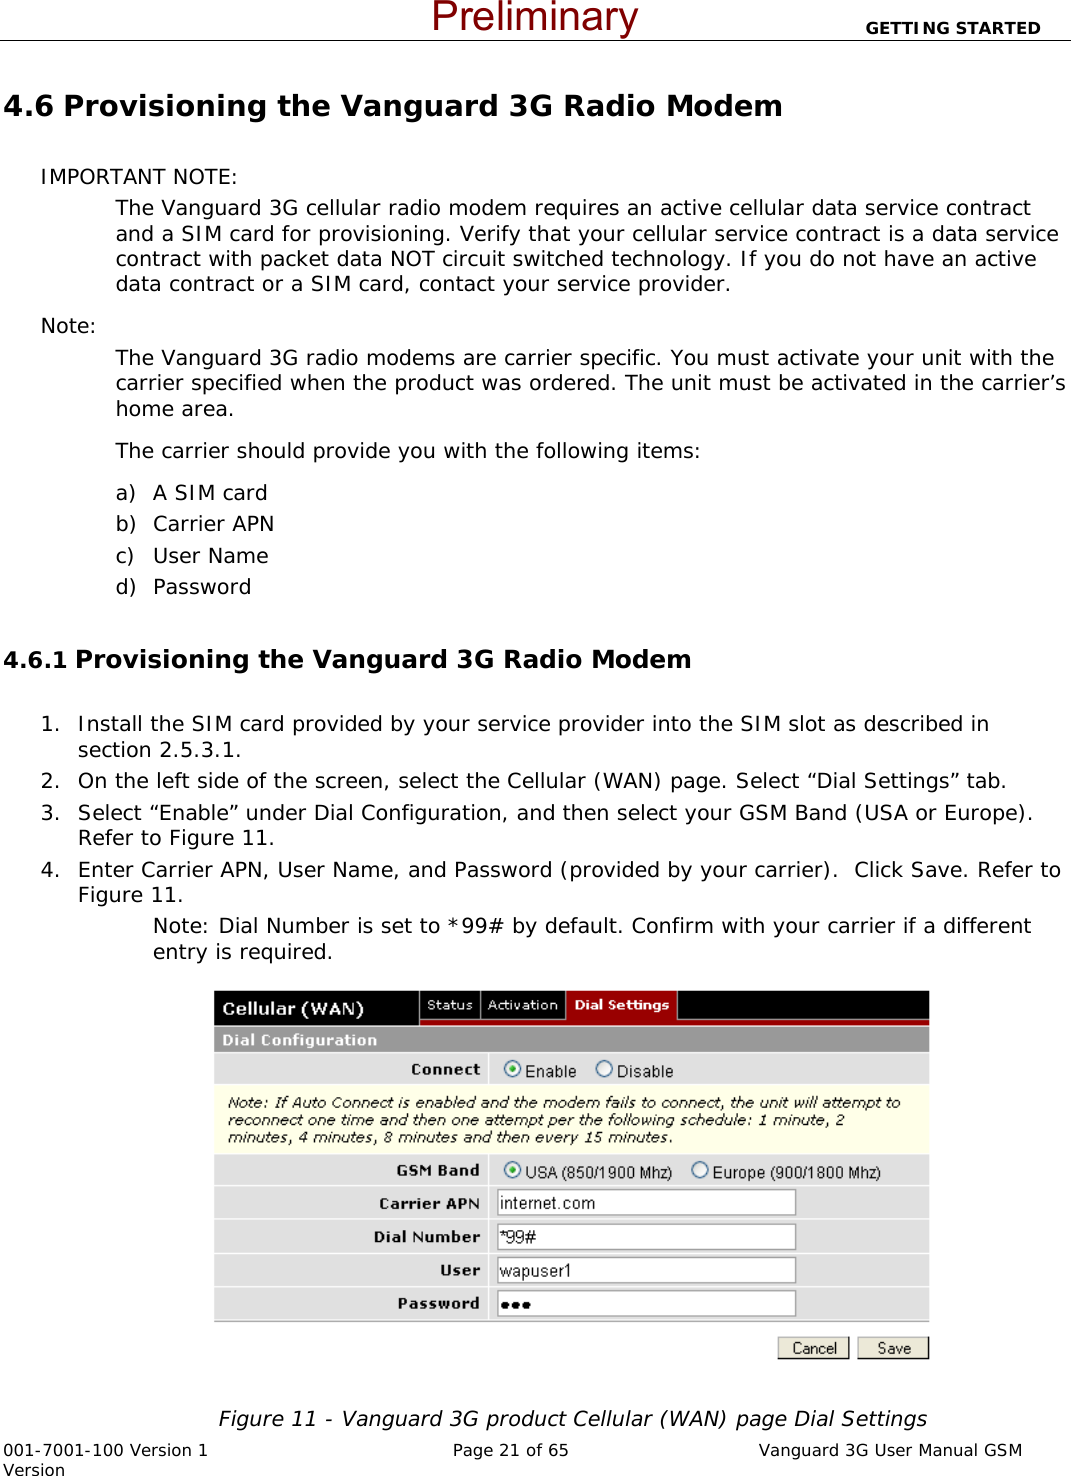                          GETTING STARTED  001-7001-100 Version 1       Page 21 of 65       Vanguard 3G User Manual GSM Version 4.6 Provisioning the Vanguard 3G Radio Modem   IMPORTANT NOTE: The Vanguard 3G cellular radio modem requires an active cellular data service contract and a SIM card for provisioning. Verify that your cellular service contract is a data service contract with packet data NOT circuit switched technology. If you do not have an active data contract or a SIM card, contact your service provider.   Note:   The Vanguard 3G radio modems are carrier specific. You must activate your unit with the carrier specified when the product was ordered. The unit must be activated in the carrier’s home area. The carrier should provide you with the following items: a) A SIM card b) Carrier APN c) User Name d) Password  4.6.1 Provisioning the Vanguard 3G Radio Modem        1. Install the SIM card provided by your service provider into the SIM slot as described in section 2.5.3.1. 2. On the left side of the screen, select the Cellular (WAN) page. Select “Dial Settings” tab. 3. Select “Enable” under Dial Configuration, and then select your GSM Band (USA or Europe). Refer to Figure 11.  4. Enter Carrier APN, User Name, and Password (provided by your carrier).  Click Save. Refer to Figure 11. Note: Dial Number is set to *99# by default. Confirm with your carrier if a different entry is required.   Figure 11 - Vanguard 3G product Cellular (WAN) page Dial Settings Preliminary